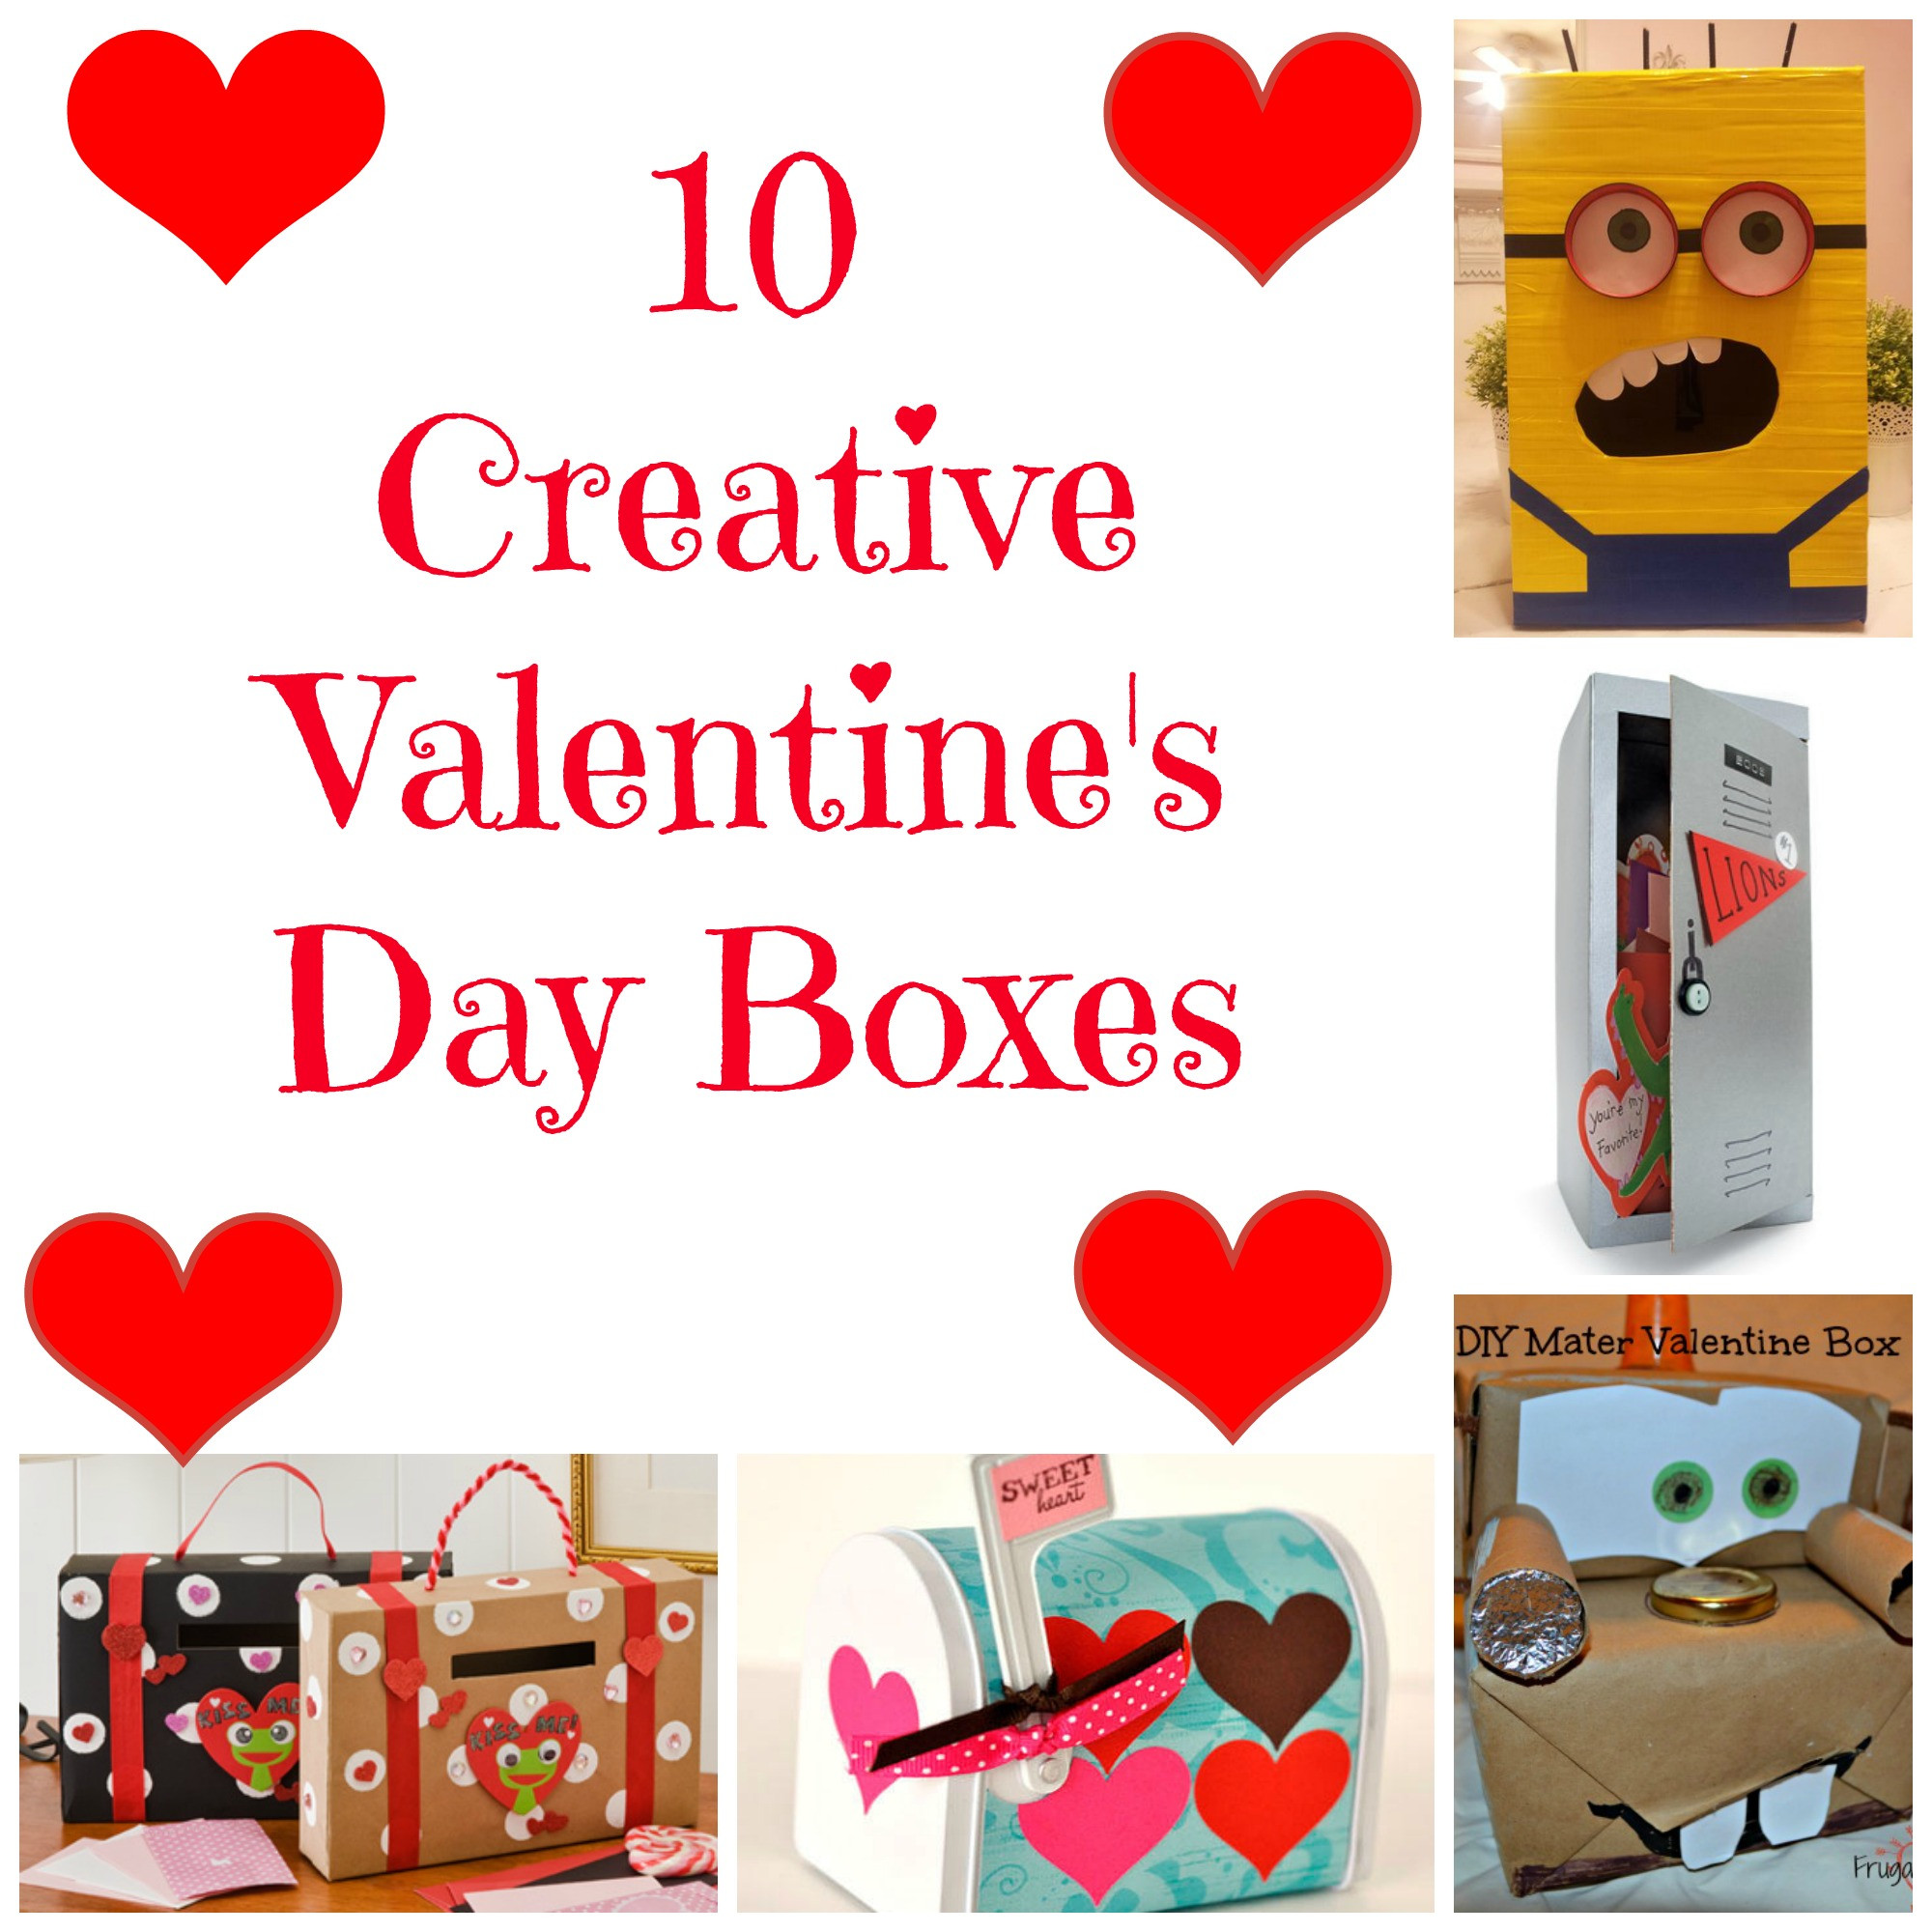 Valentines Day Boxes Ideas
 Valentine s Day Box Ideas for Kids to Make